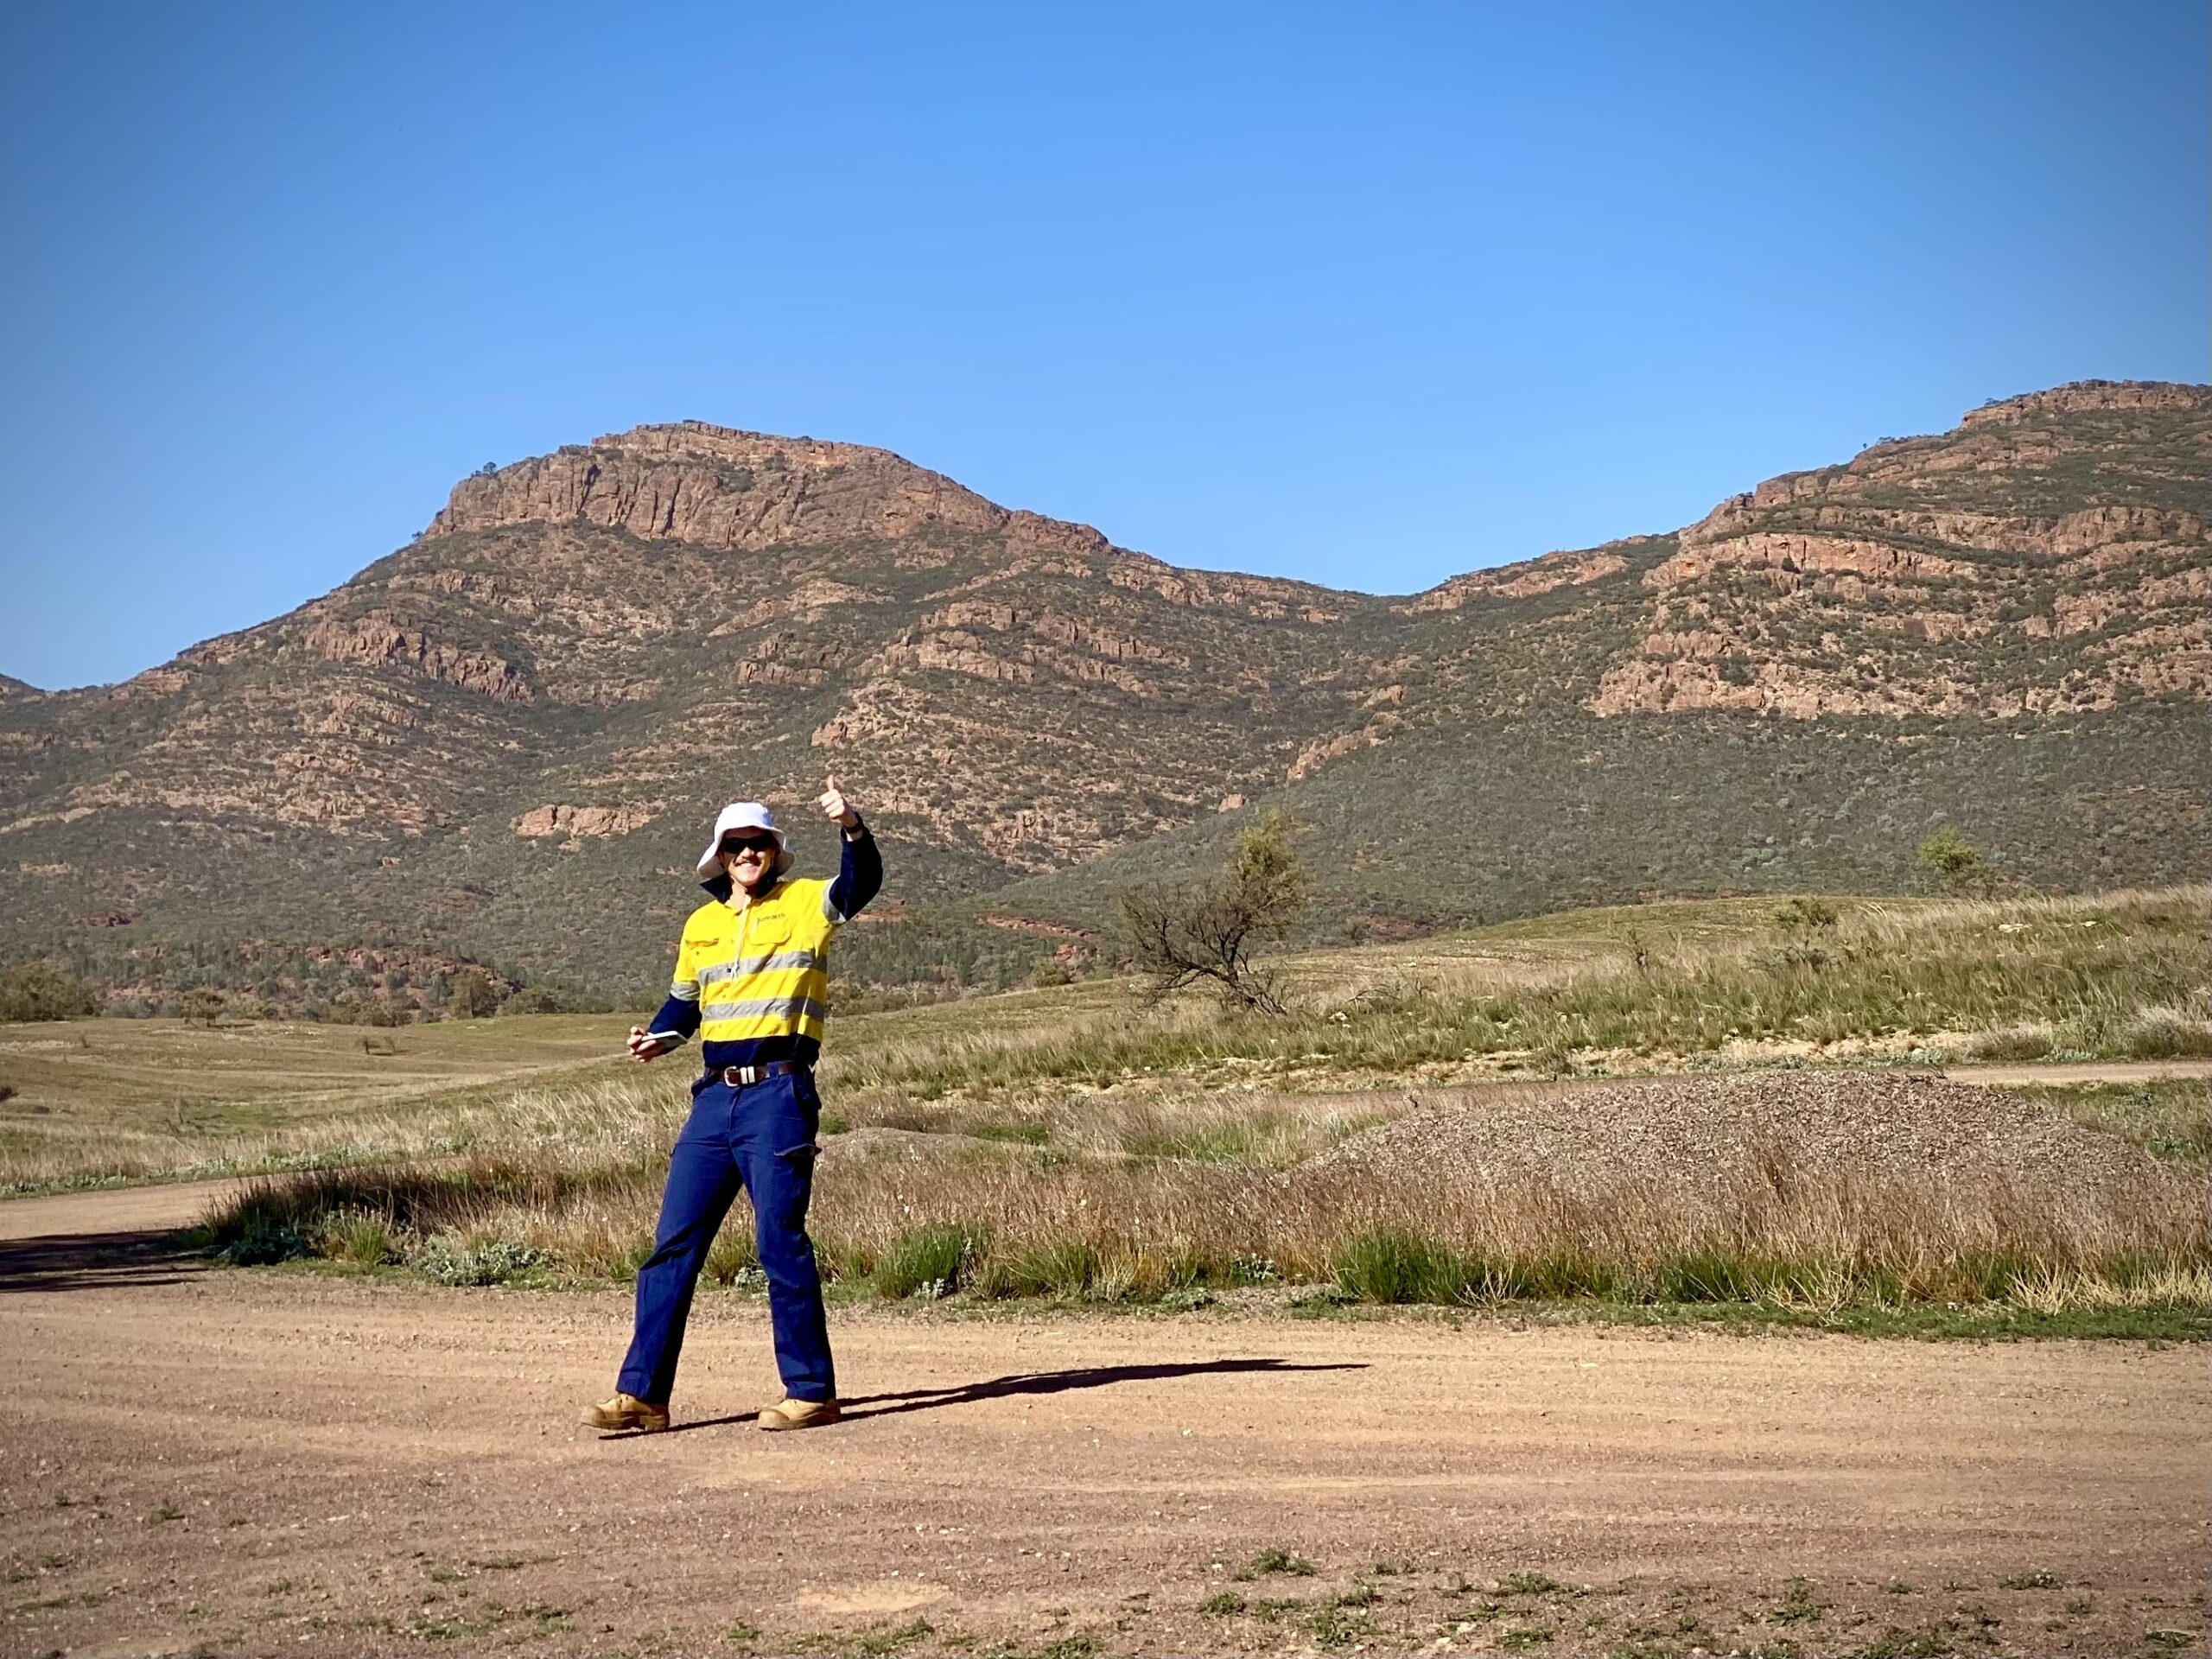 Riley visiting remote locations - Wilpena Pound, Flinders Ranges, SA